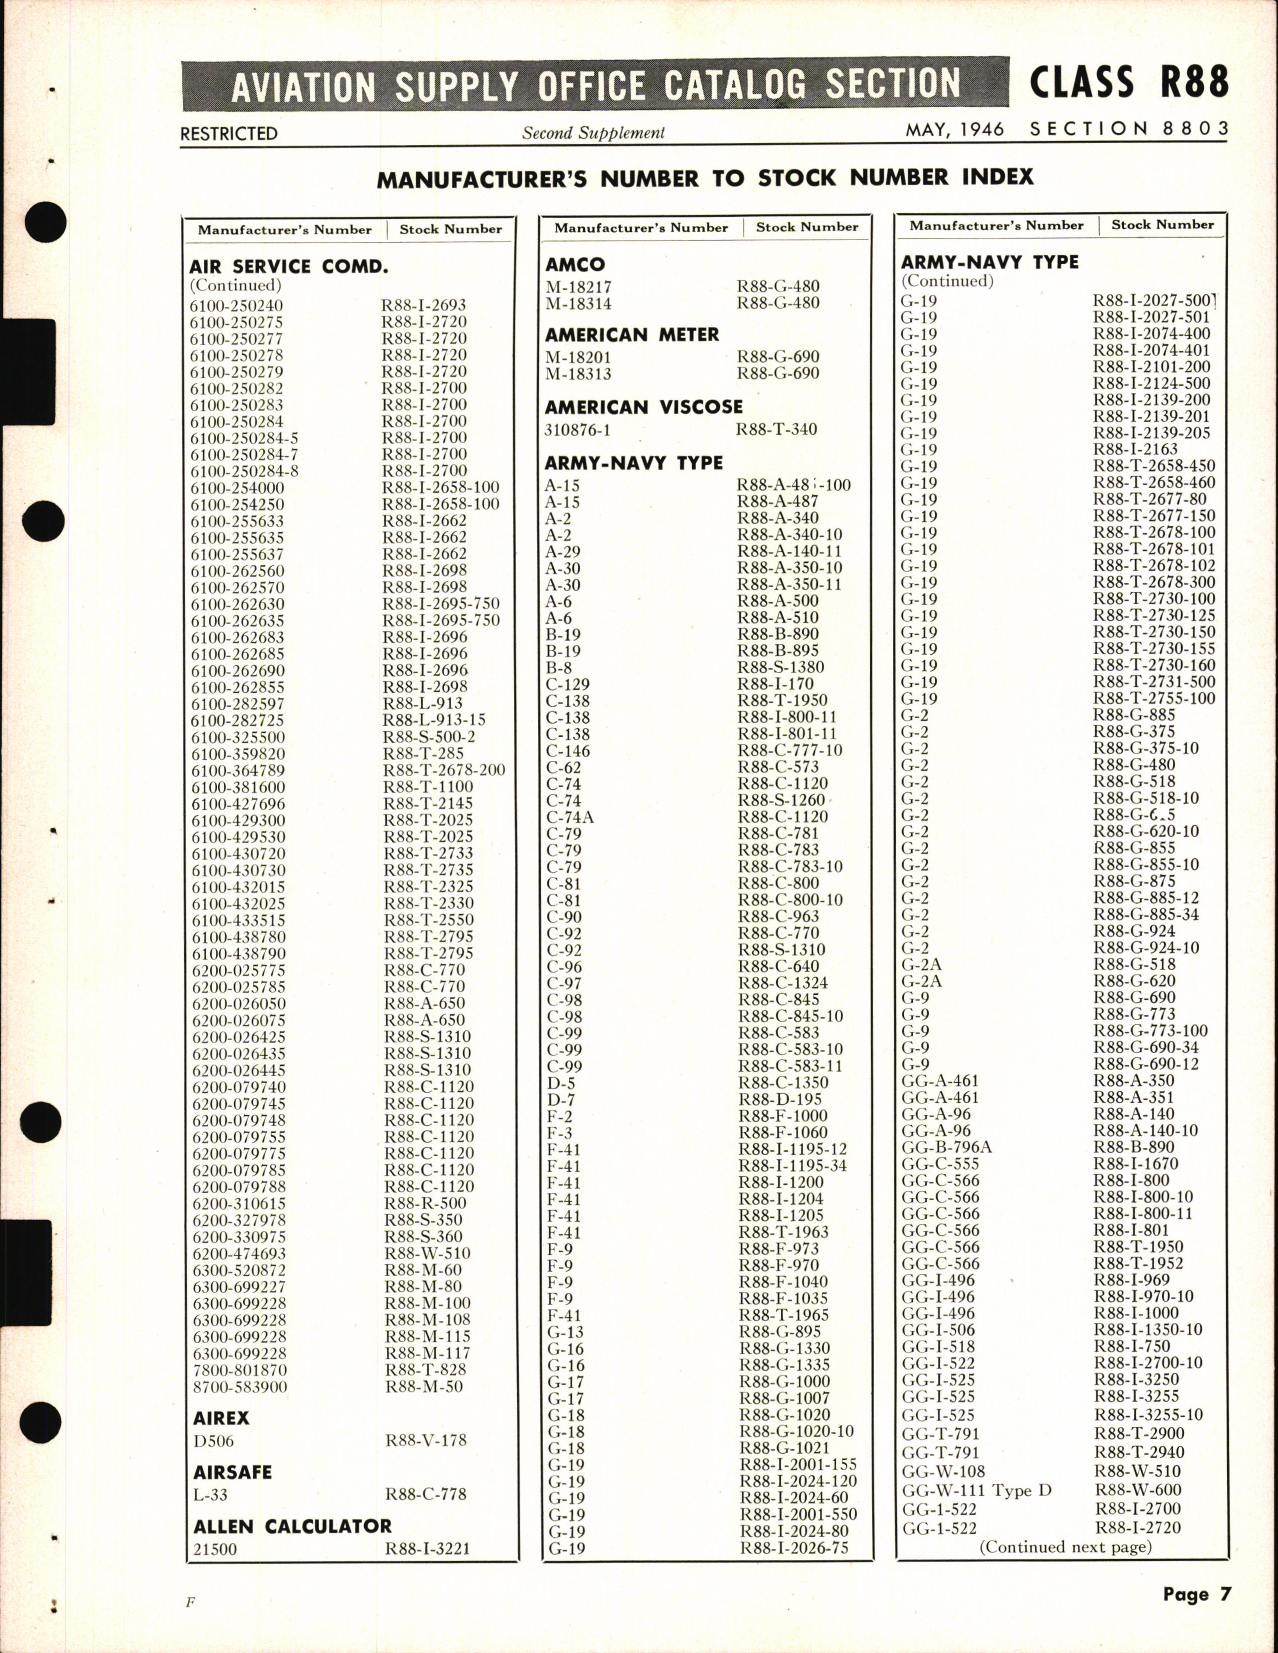 Sample page 7 from AirCorps Library document: Aeronautical Instruments Supplement-2